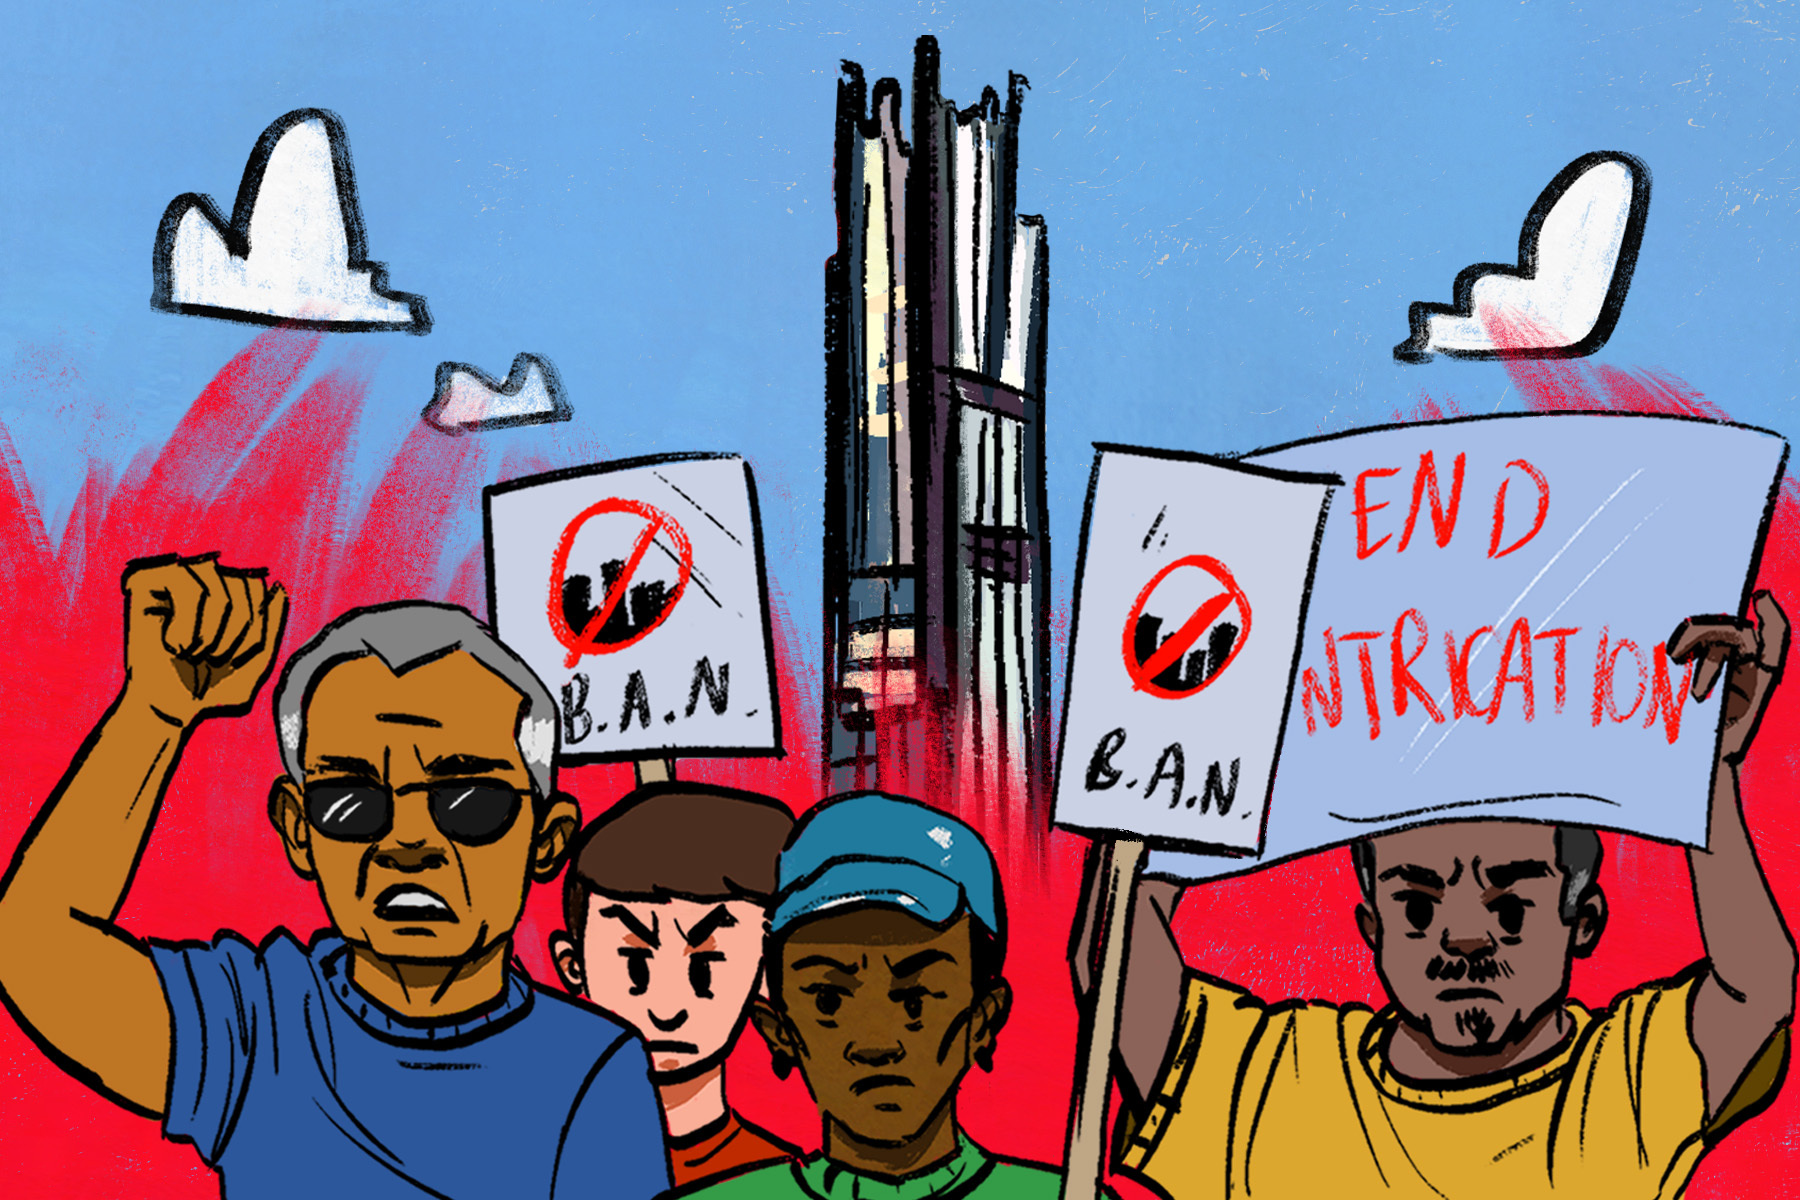 An illustration of protestors against the Brooklyn Tower